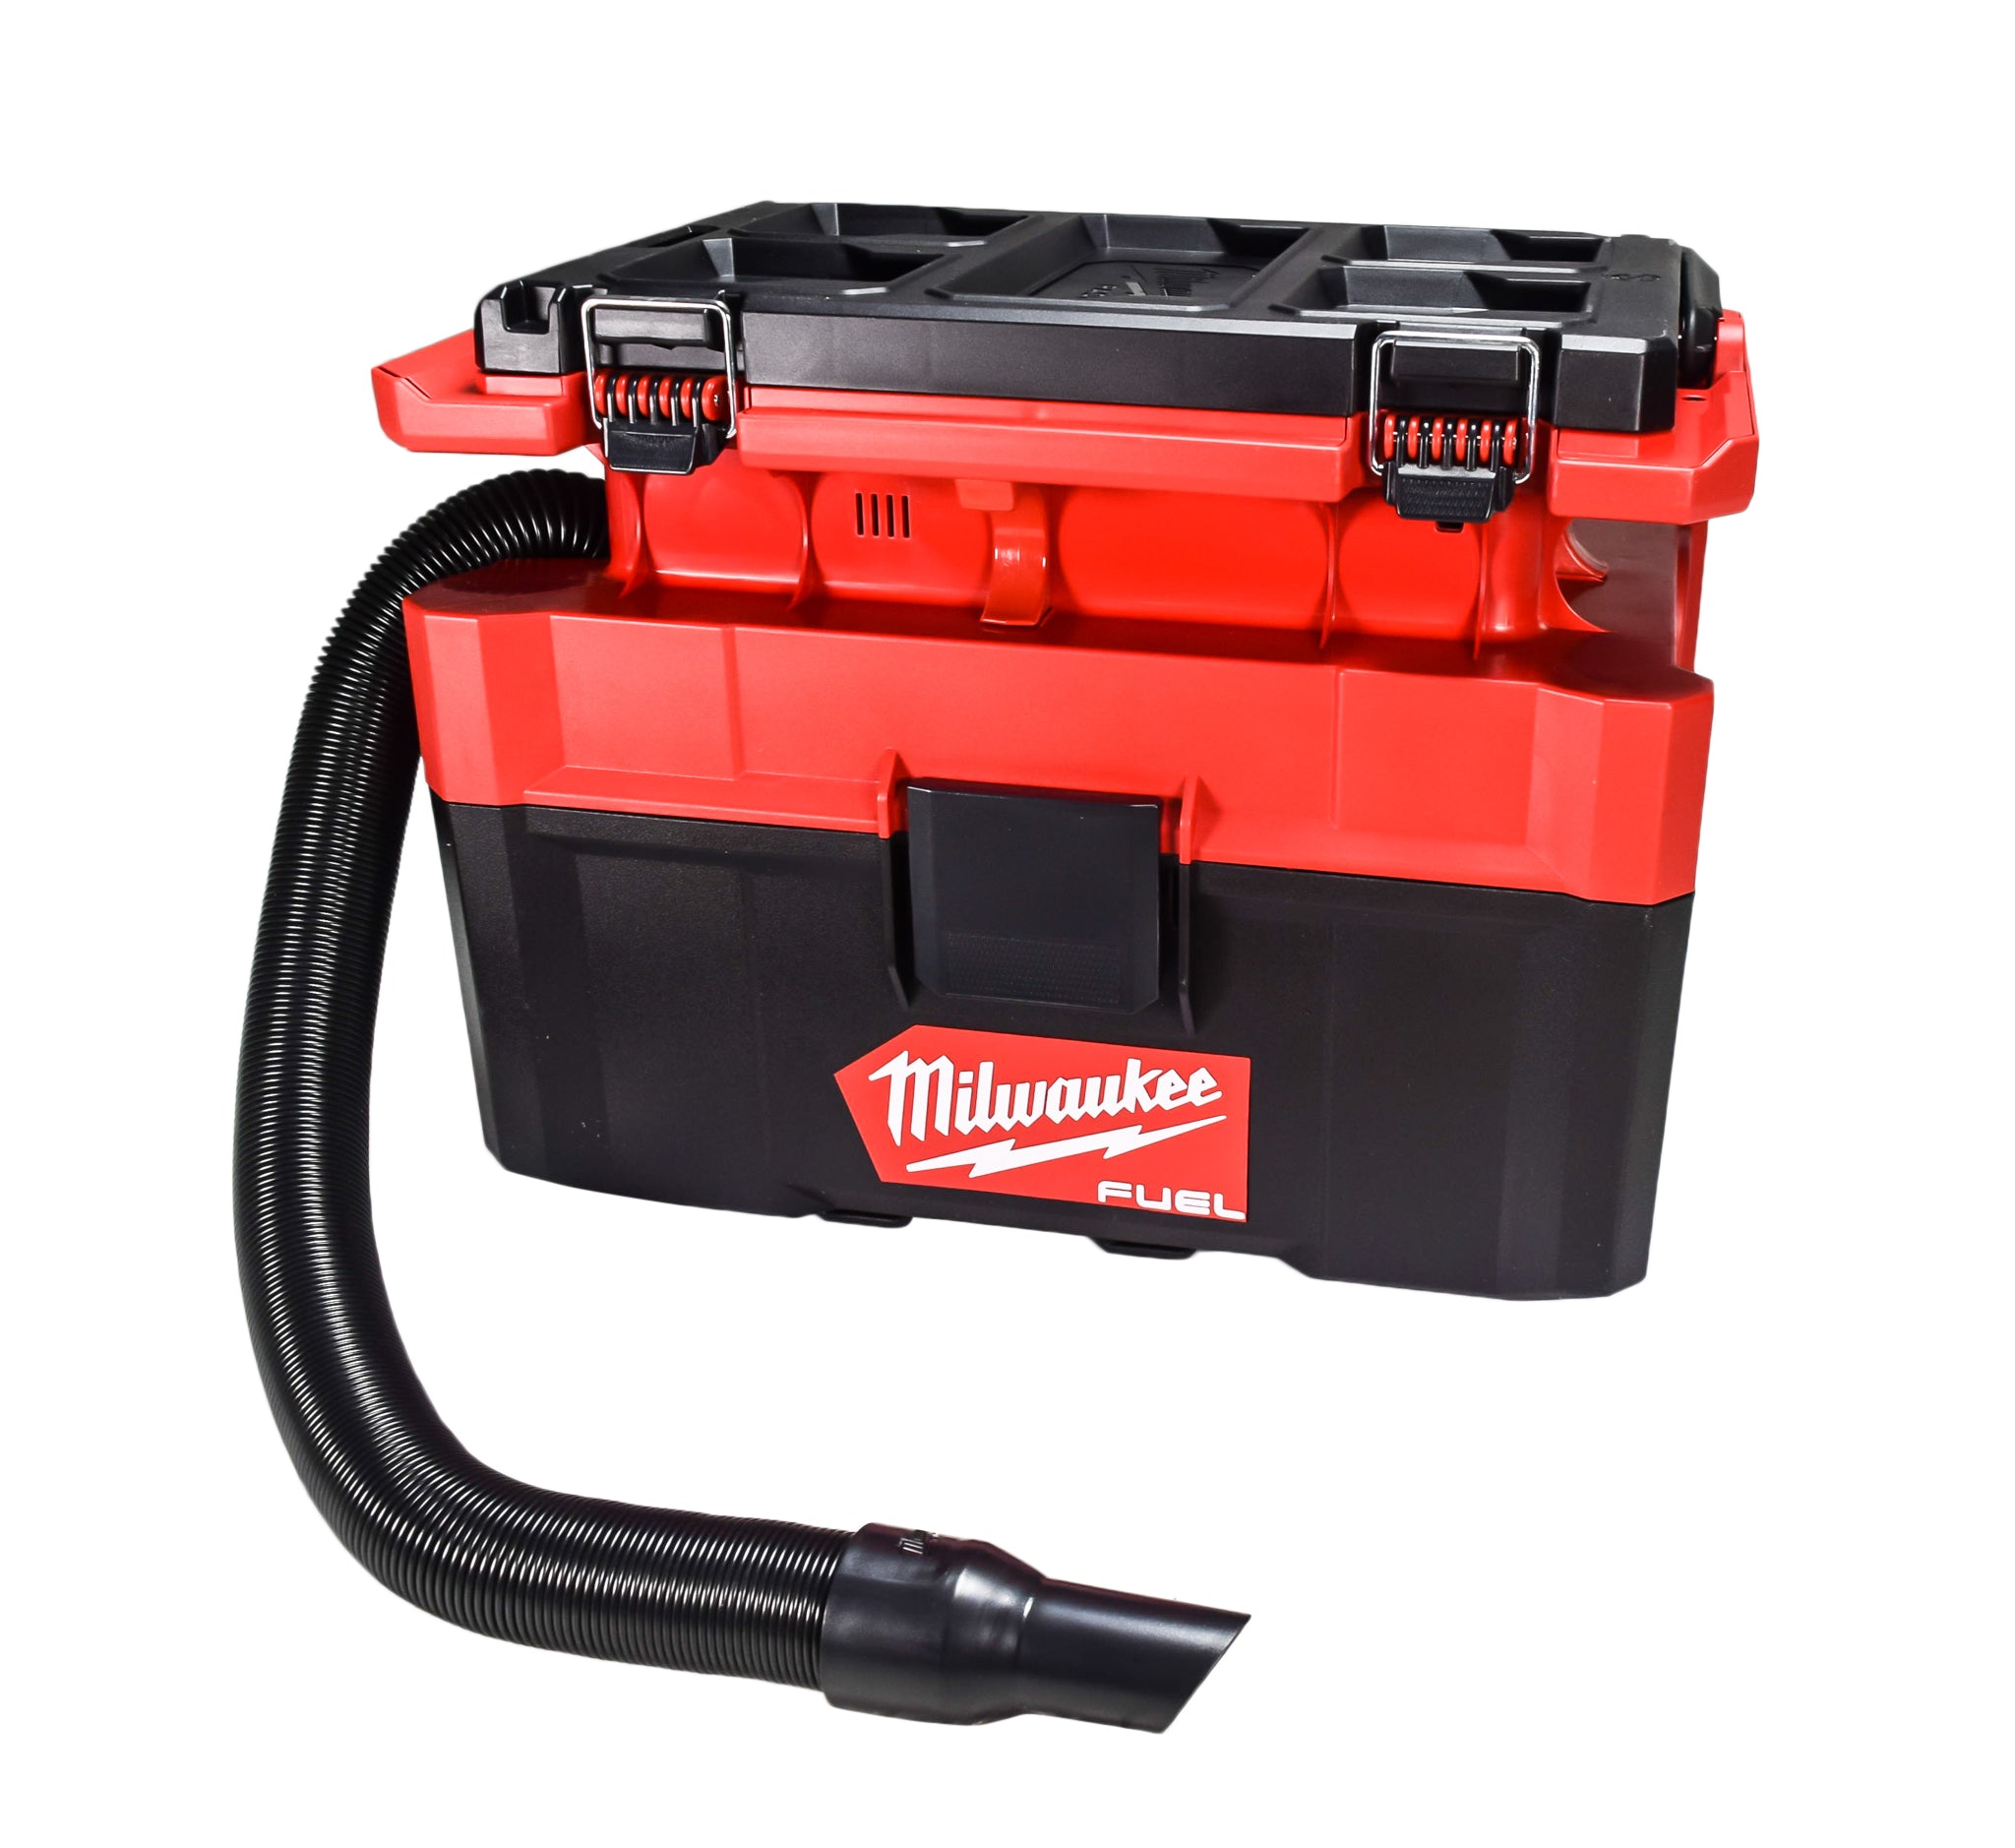 Milwaukee-0970-20-M18-Fuel-PACKOUT-2.5-Gallon-Wet-Dry-Vacuum-Tool-Only-image-2